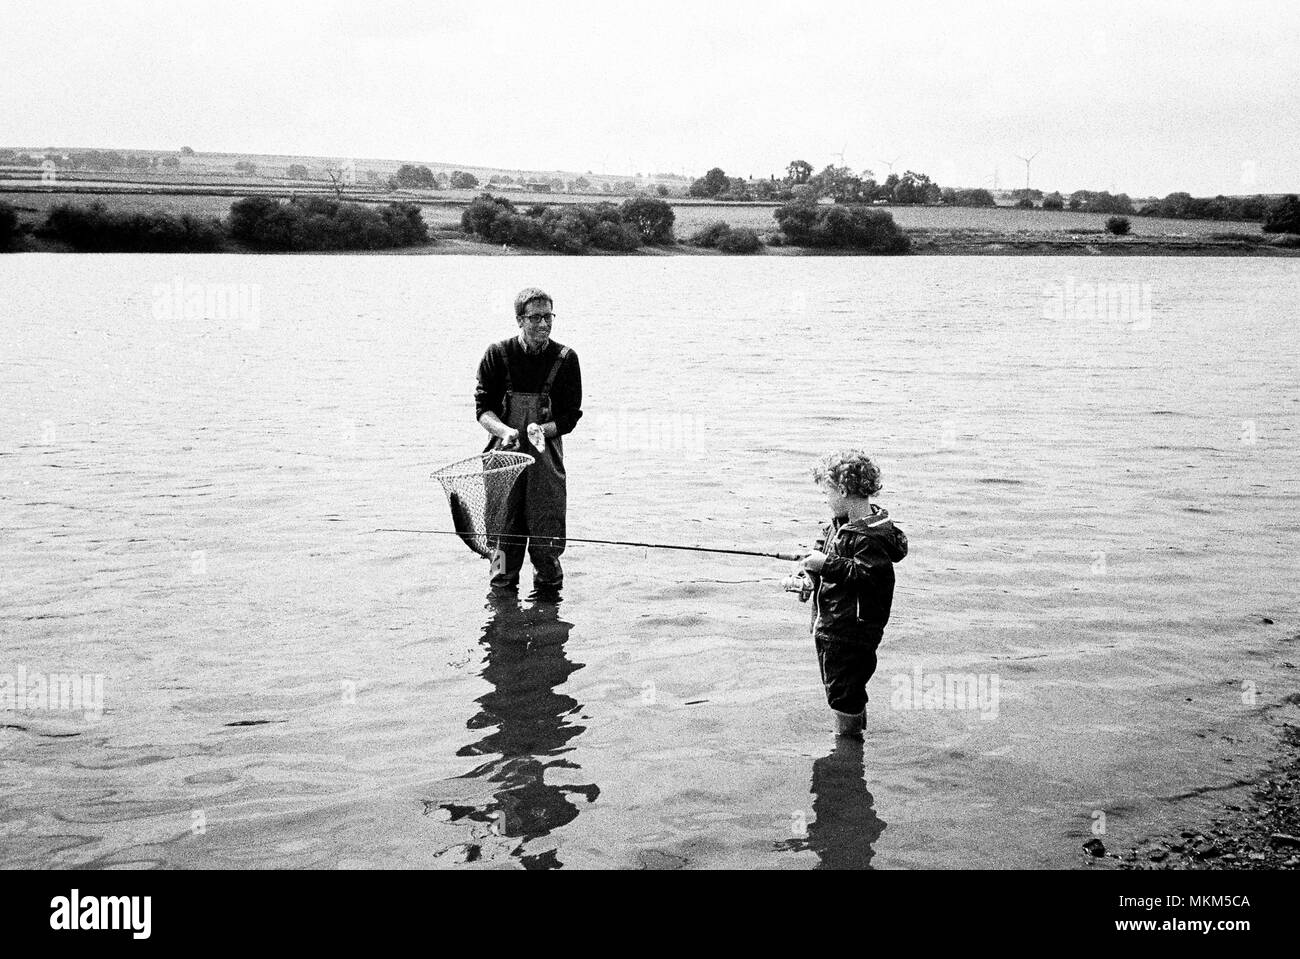 https://c8.alamy.com/comp/MKM5CA/four-year-old-boy-fishing-for-trout-with-his-uncle-at-scout-dike-reservoirhuddersfield-roadpenistone-south-yorkshire-englanduk-MKM5CA.jpg